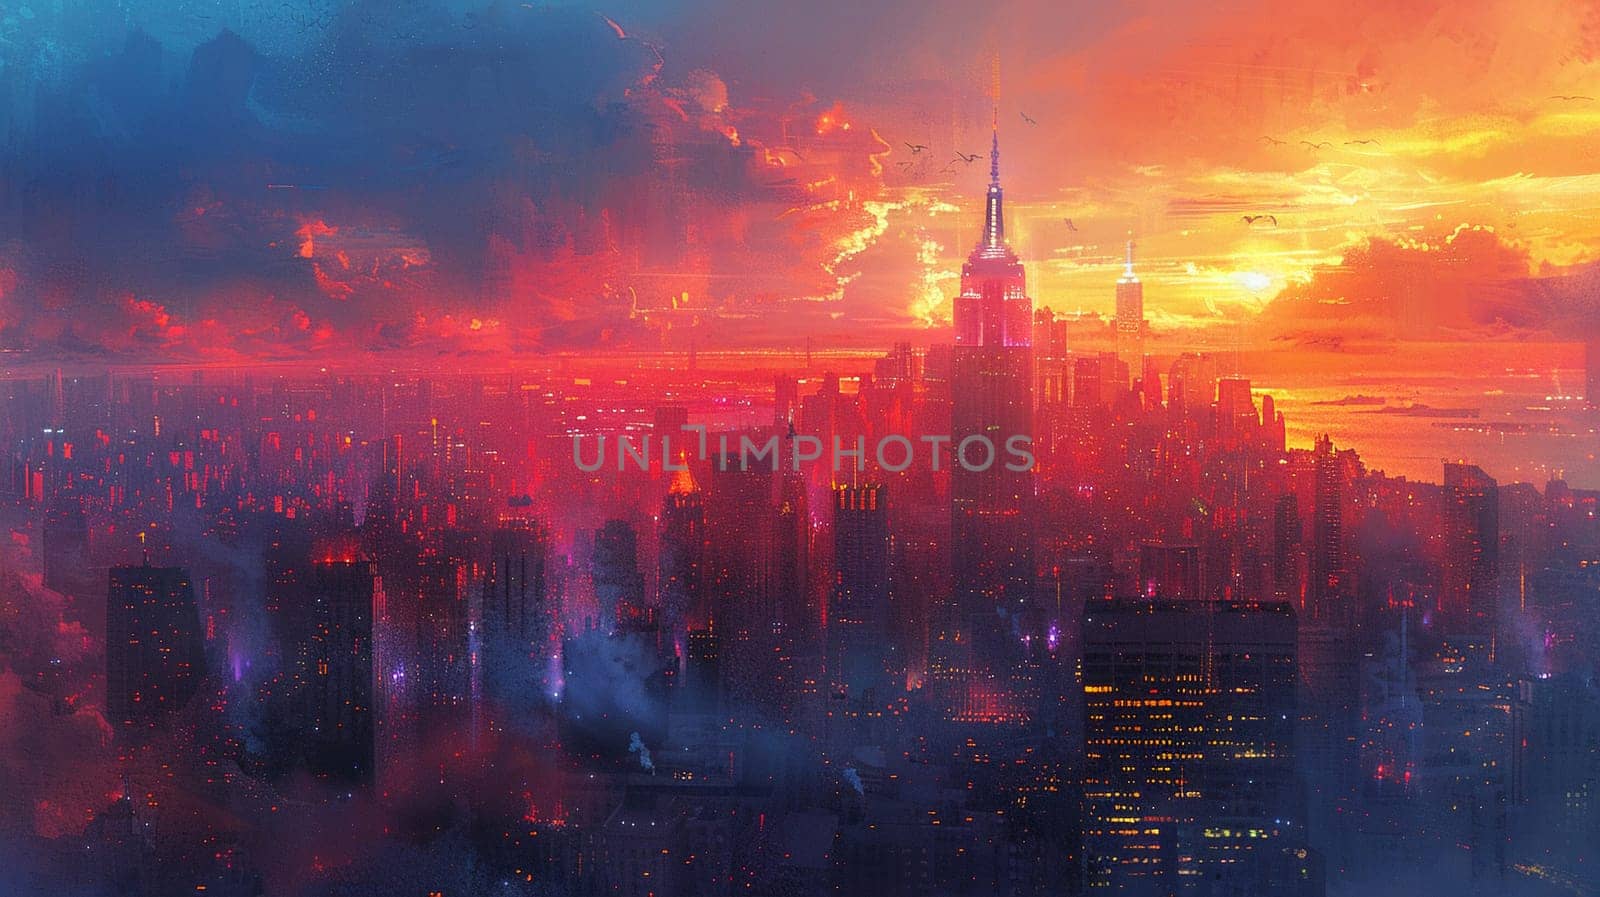 City overlook rendered in an expressive painterly style by Benzoix